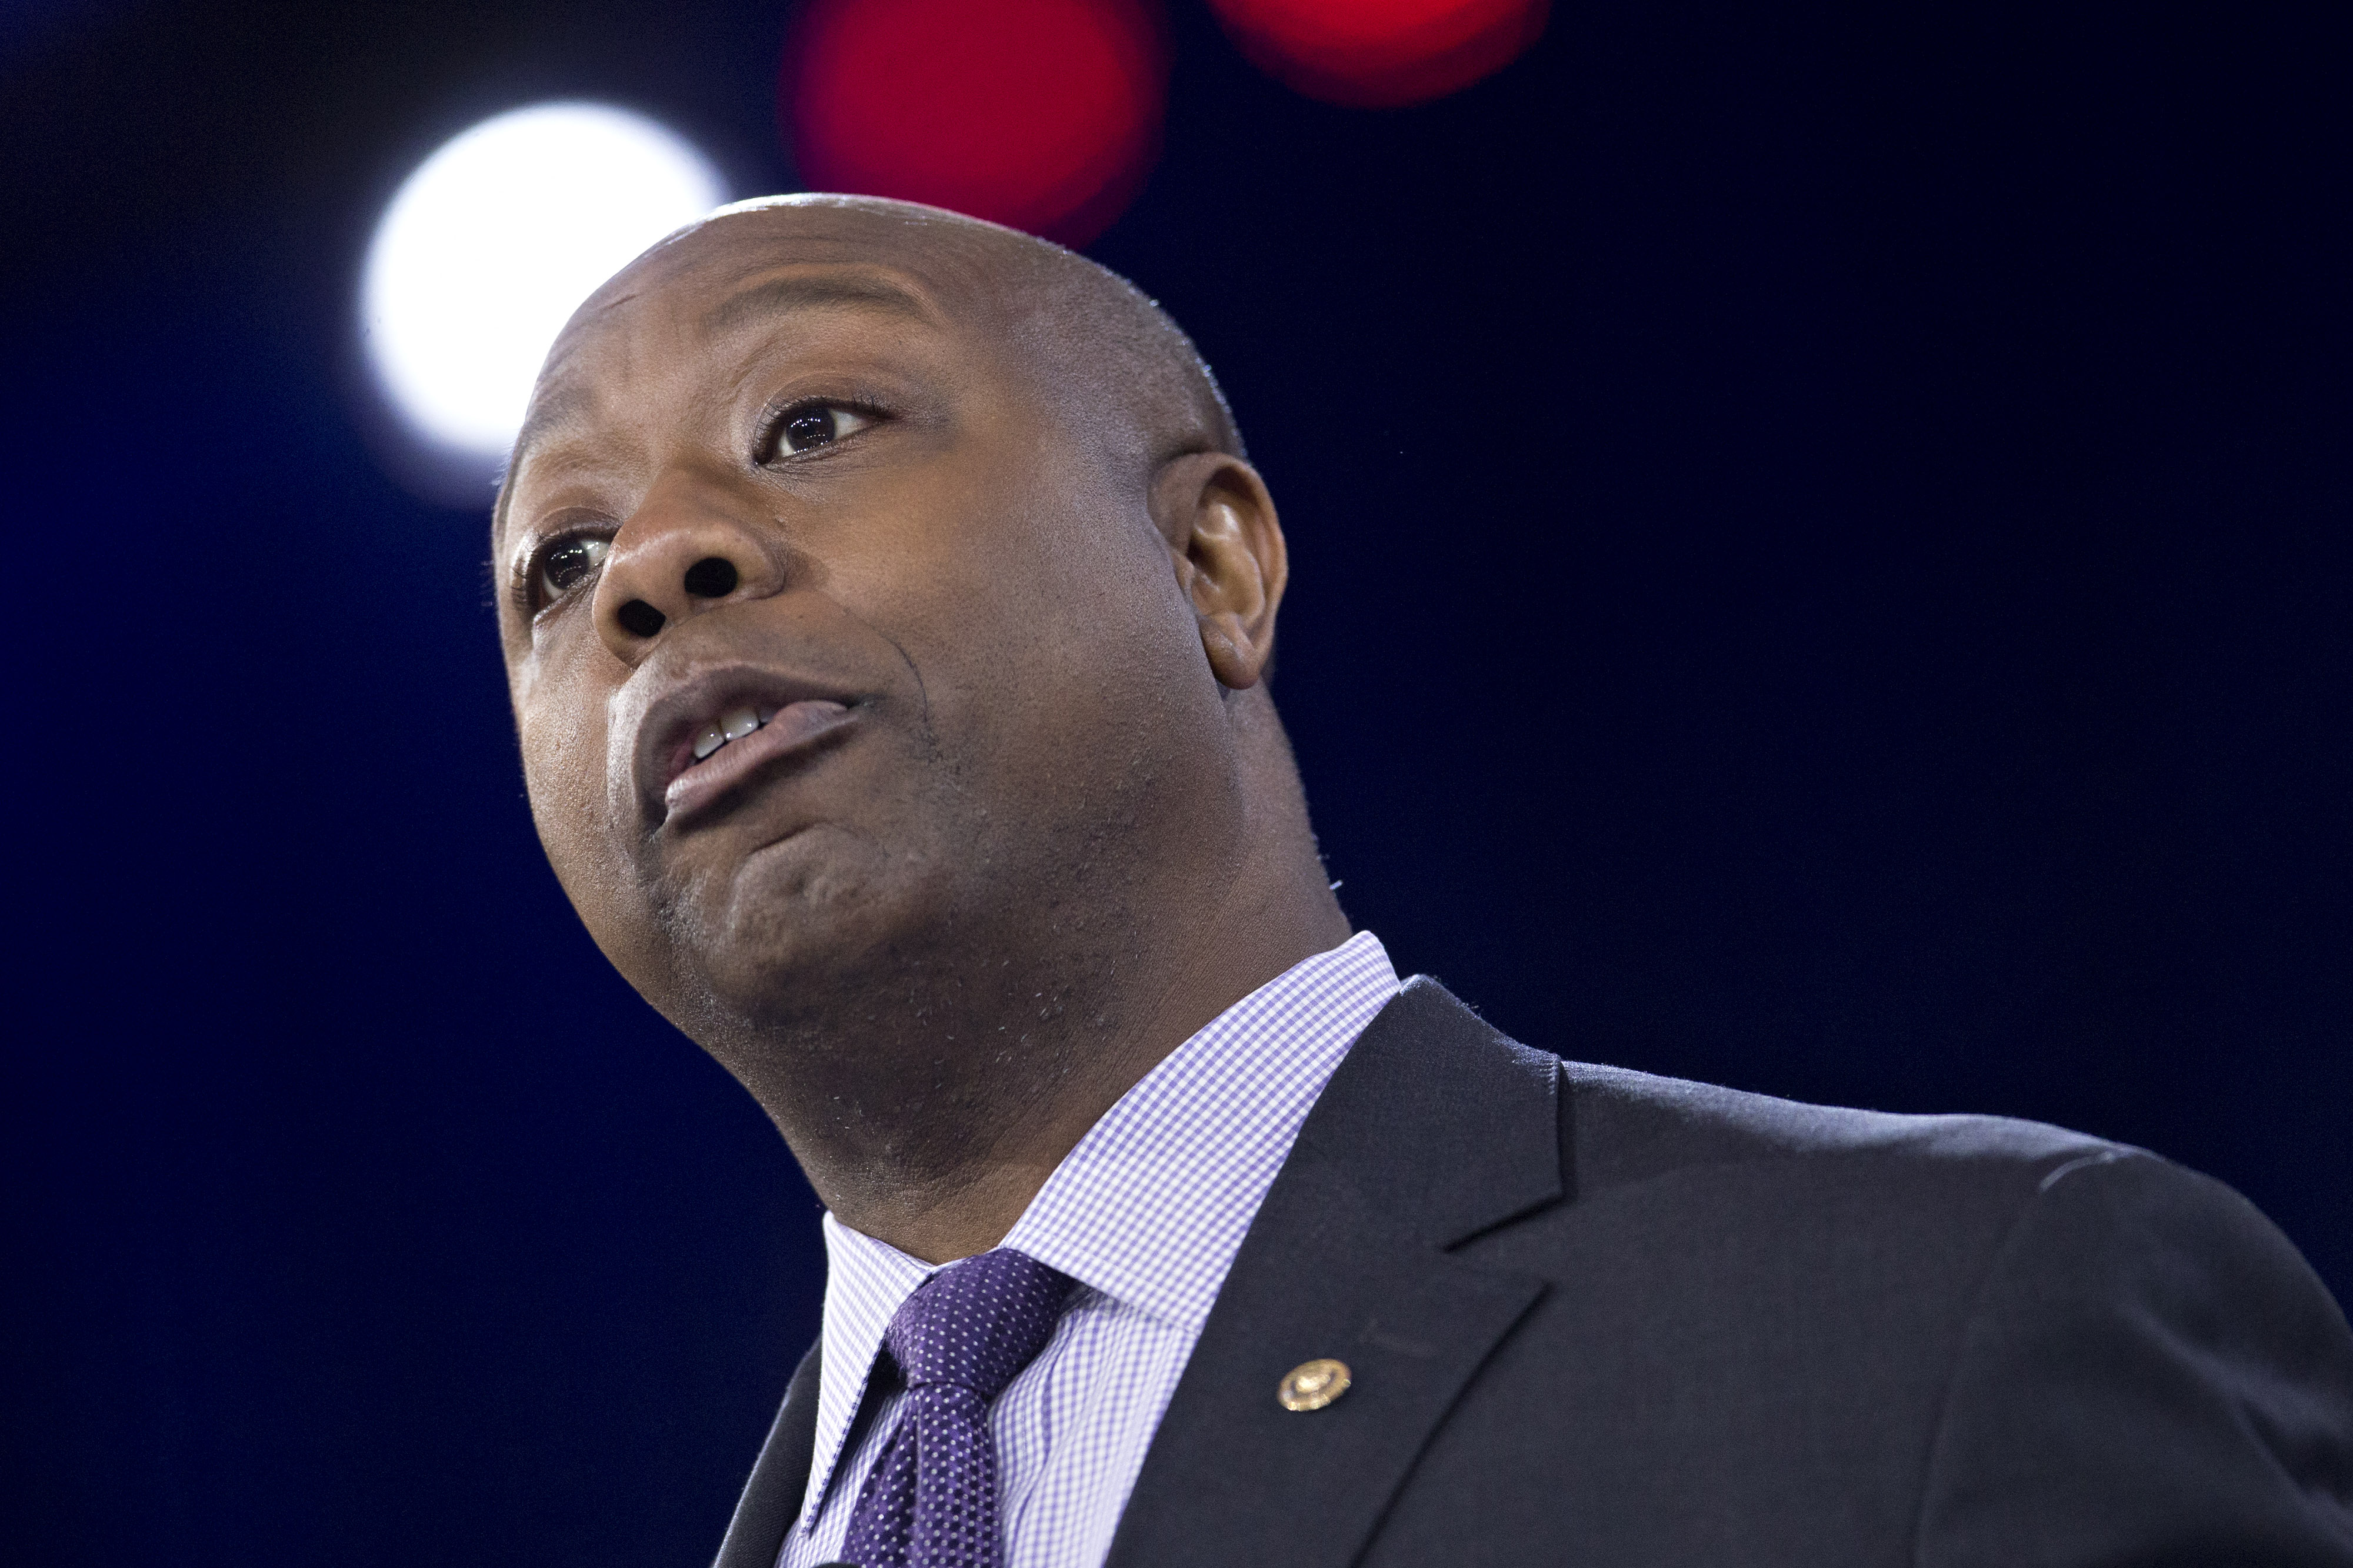 Senator Tim Scott, a Republican from South Carolina, speaks during the Conservative Political Action Conference (CPAC) meeting in National Harbor, Maryland on March 3, 2016. (Andrew Harrer/Bloomberg—Getty Images)